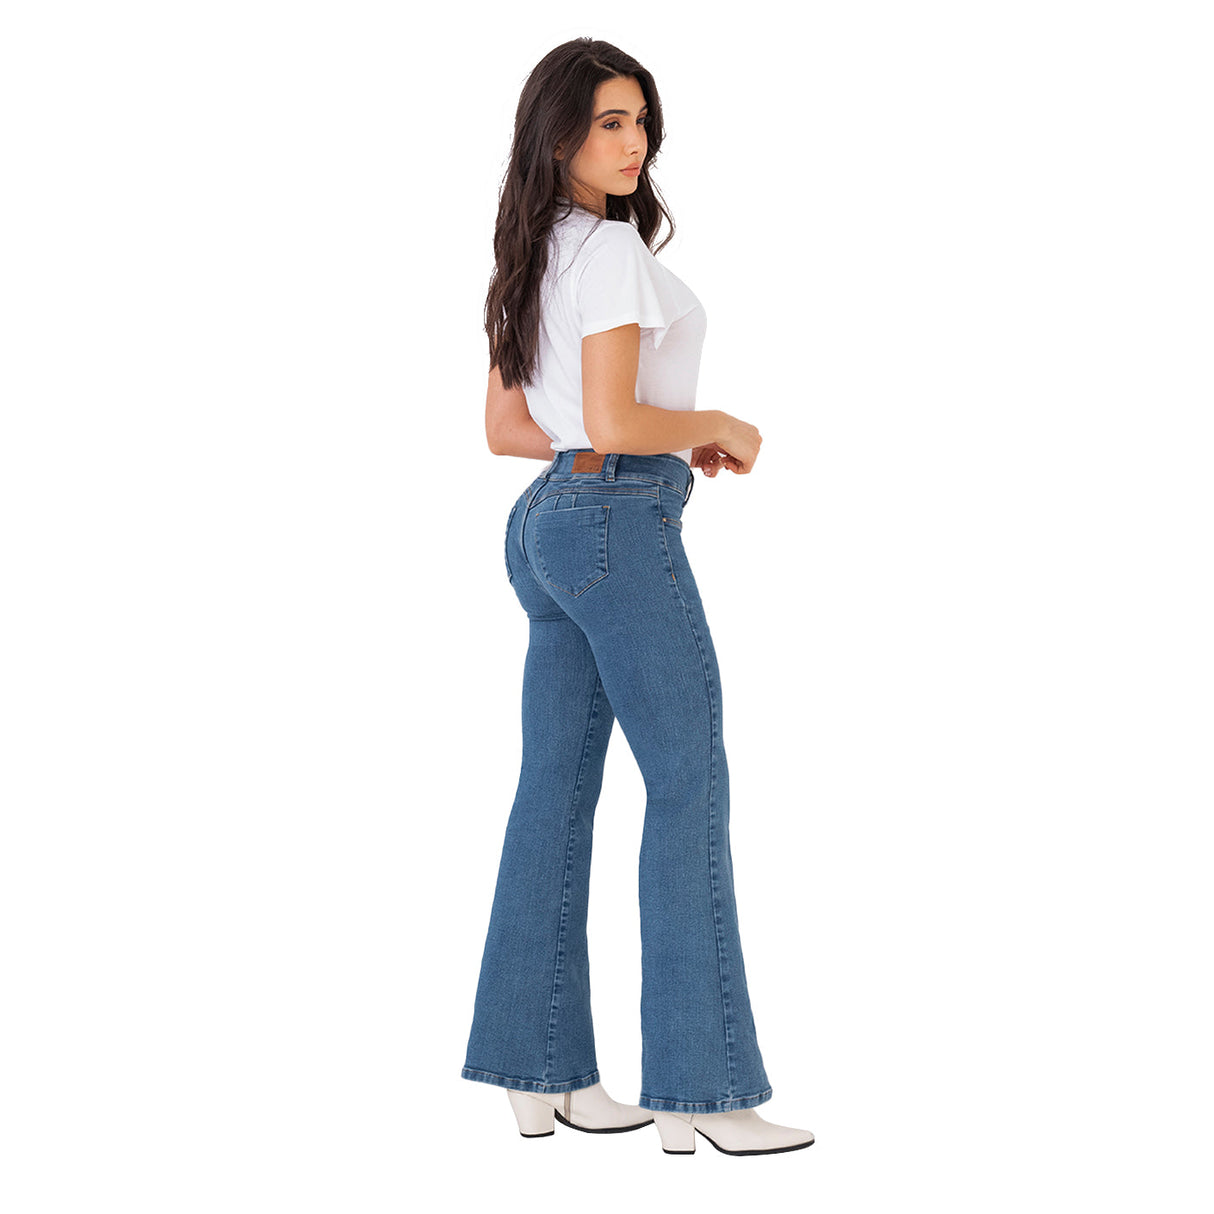 Colombian Butt Lifter Jeans with removable pads – Fajas Colombianas Sale